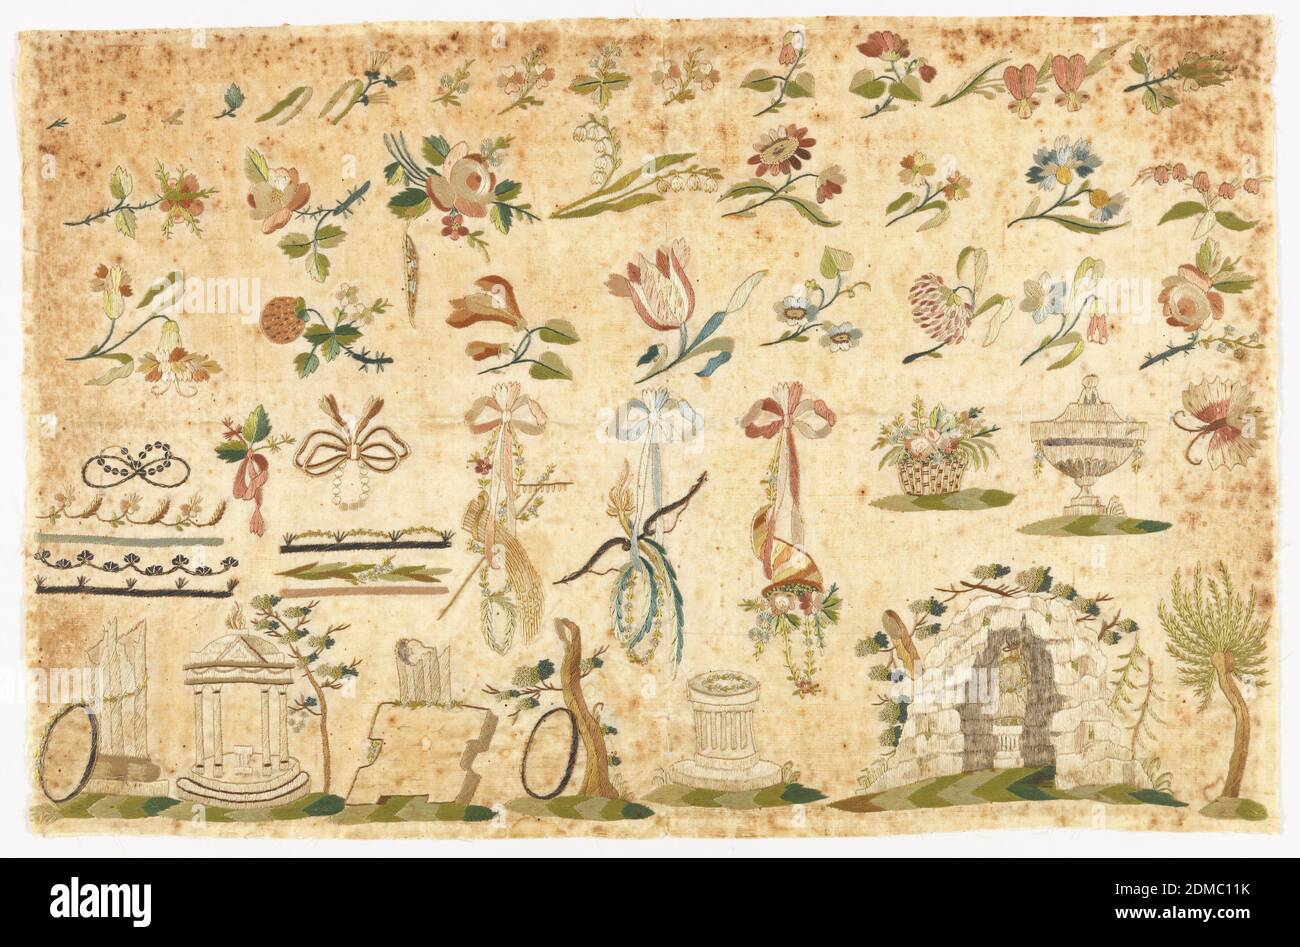 Sampler, Medium: silk and metal threads (flat metal and metal-wrapped silk) on silk foundation Technique: embroidered in satin, French knots, stem and chain stitches on plain weave foundation, Page from book 'Zeichen Mahler und Stickerbuch' by Johann Friedrich Netto, Liepzig, 1795., Leipzig, Germany, after 1795, embroidery & stitching, Sampler Stock Photo